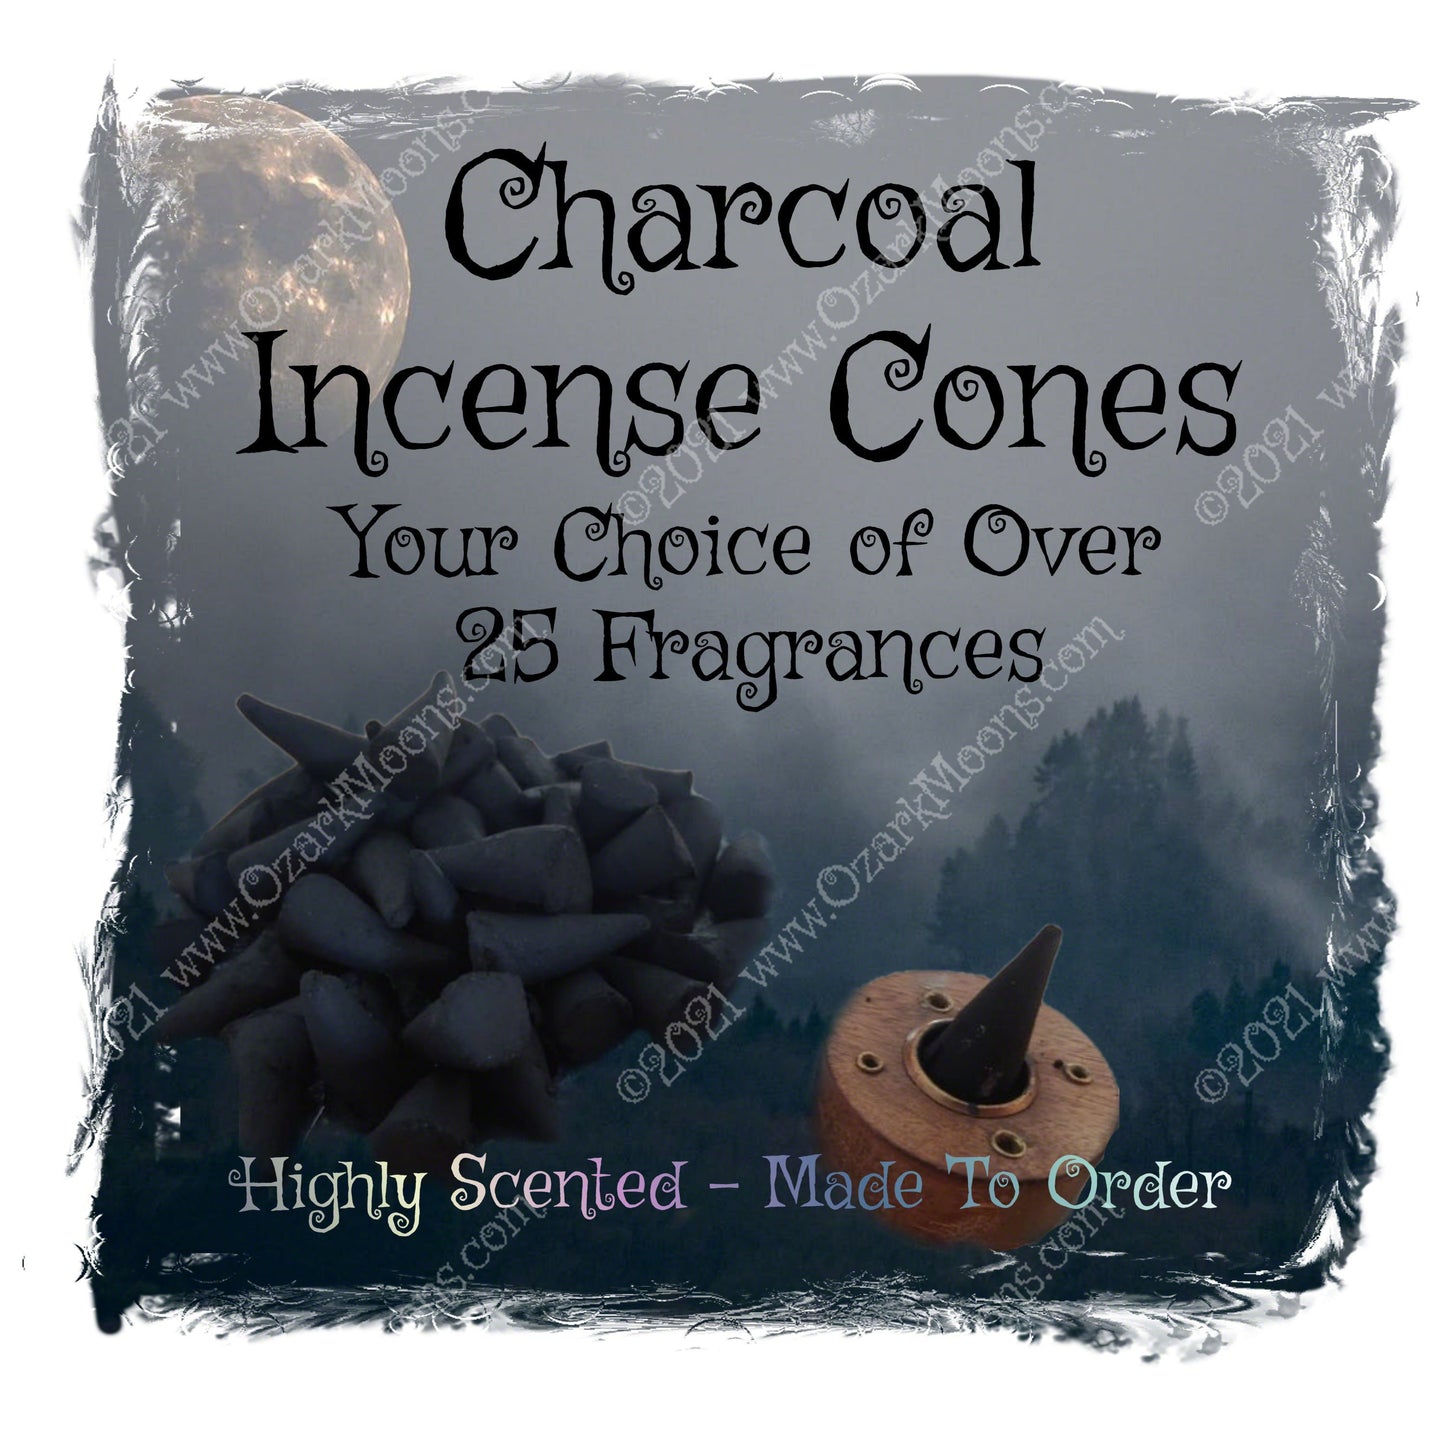 Charcoal Incense Cones Highly Scented In Your Choice of Scents - Clean Burning With No Wood Filler - Hand Dipped and Made to Order